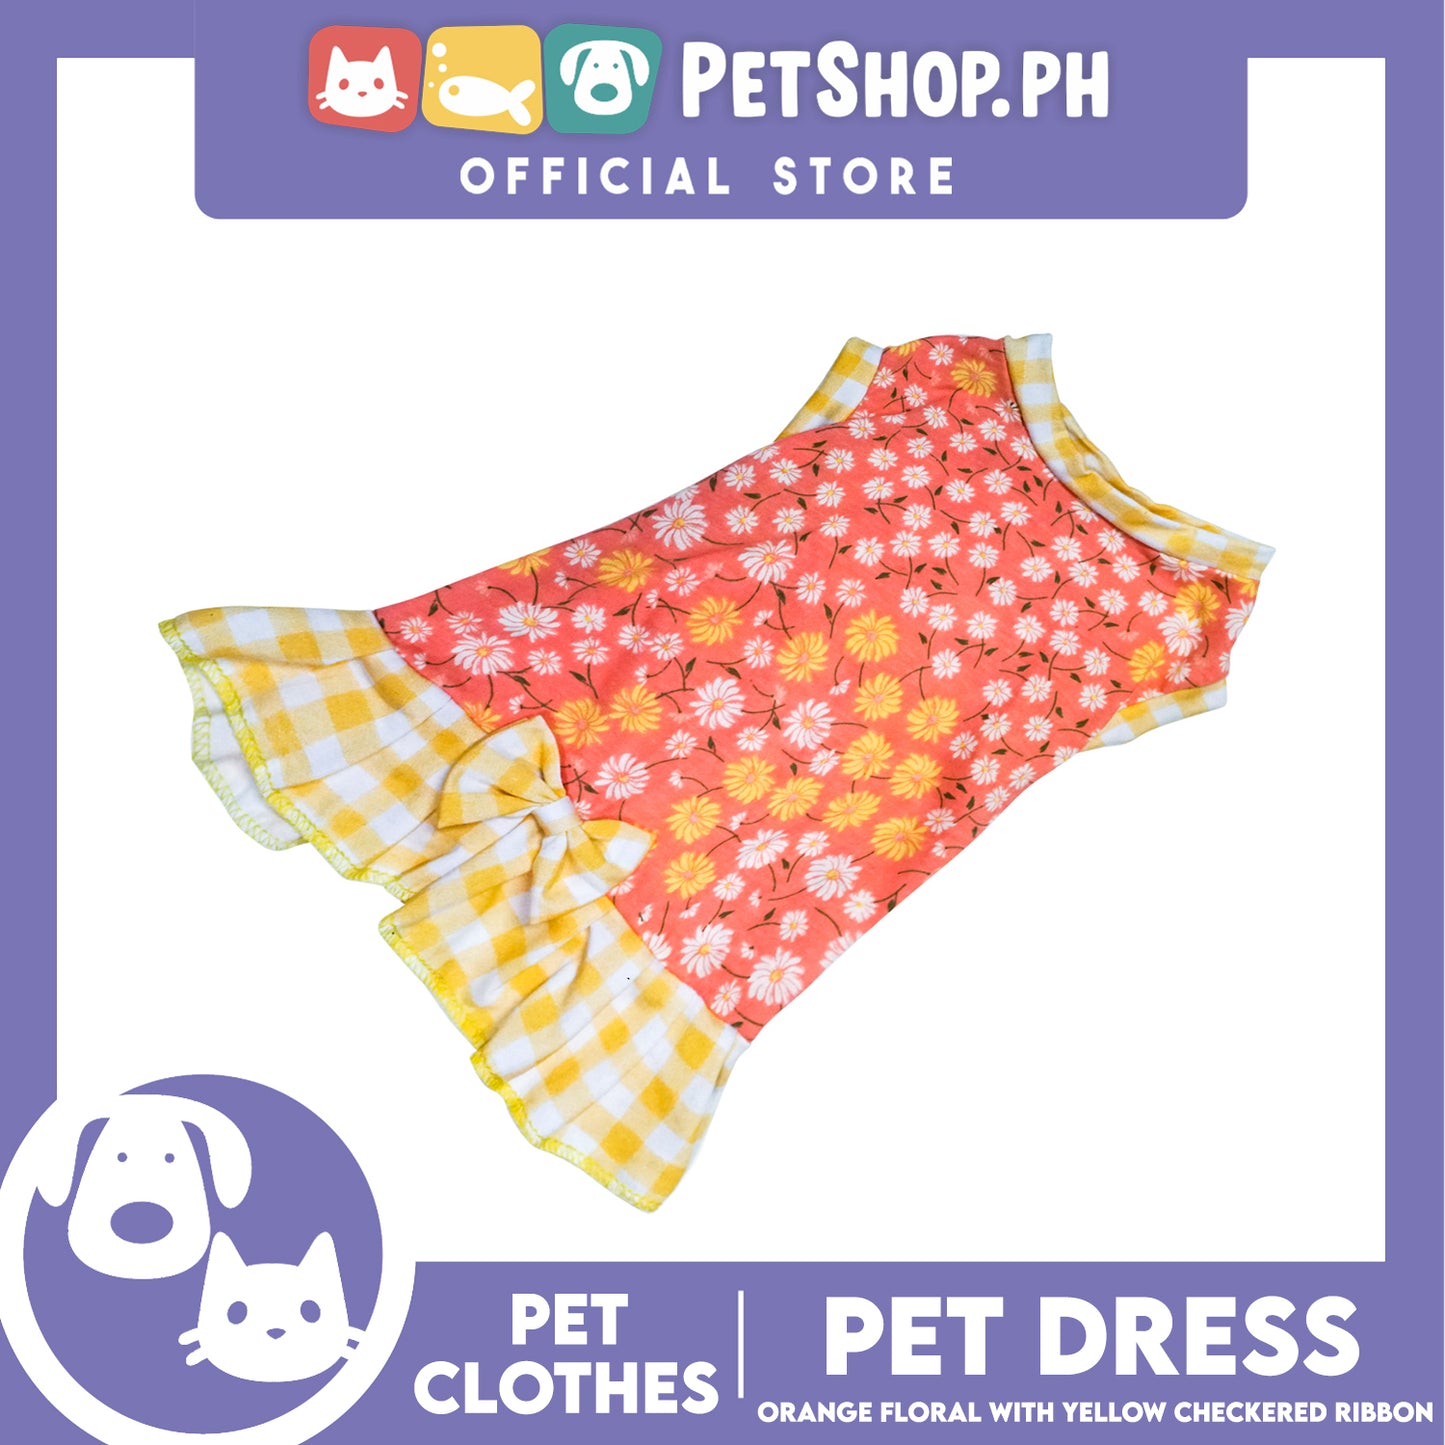 Pet Dress Orange Floral Yellow Checkered with Ribbon (Medium) Pet Dress Clothes Perfect for Dogs